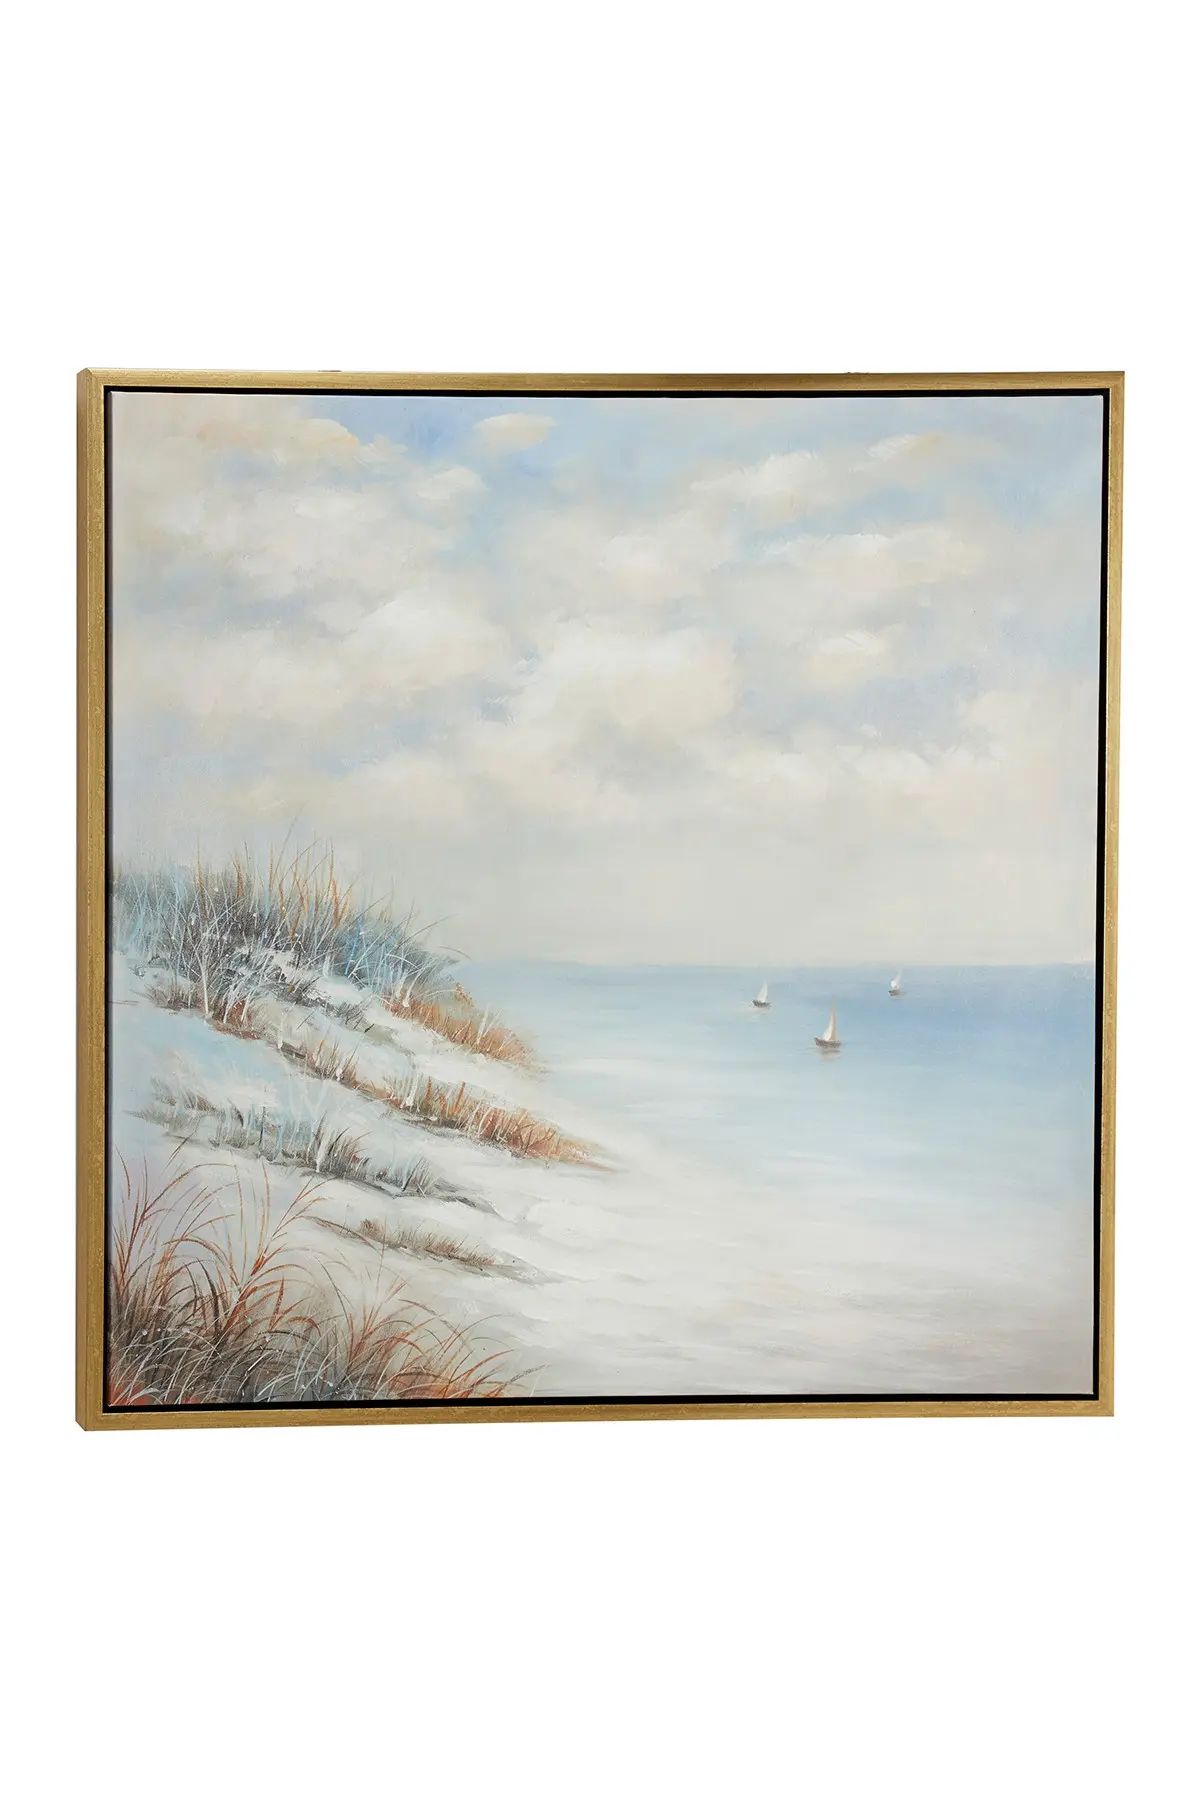 Willow Row Large Square Acrylic Painting Of Beach & Sailboats Coastal Artwork In Wood Frame - 39.5"  | Nordstrom Rack